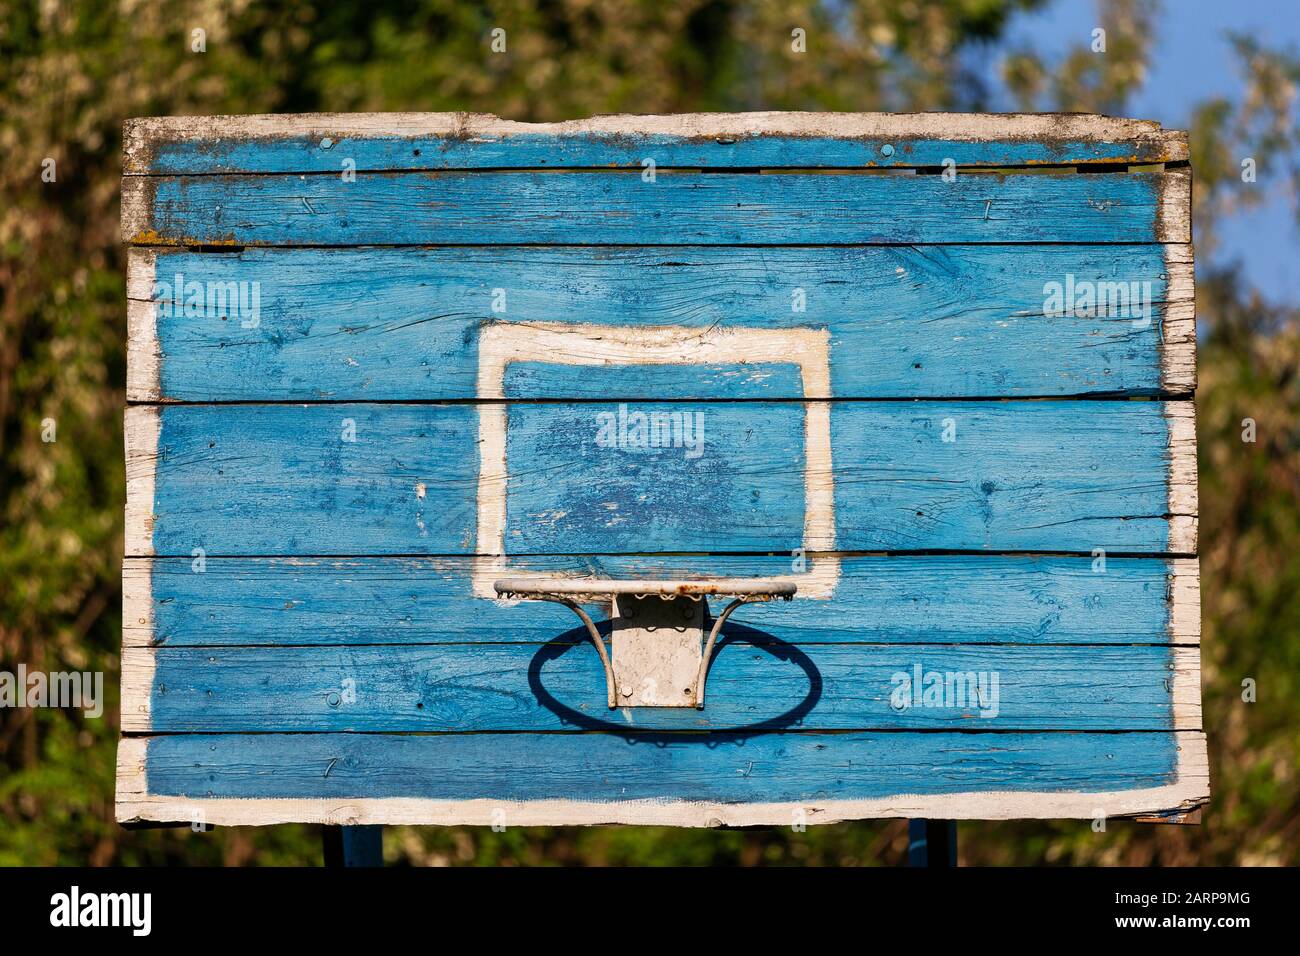 basketball hoop on the outskirts of the area Stock Photo